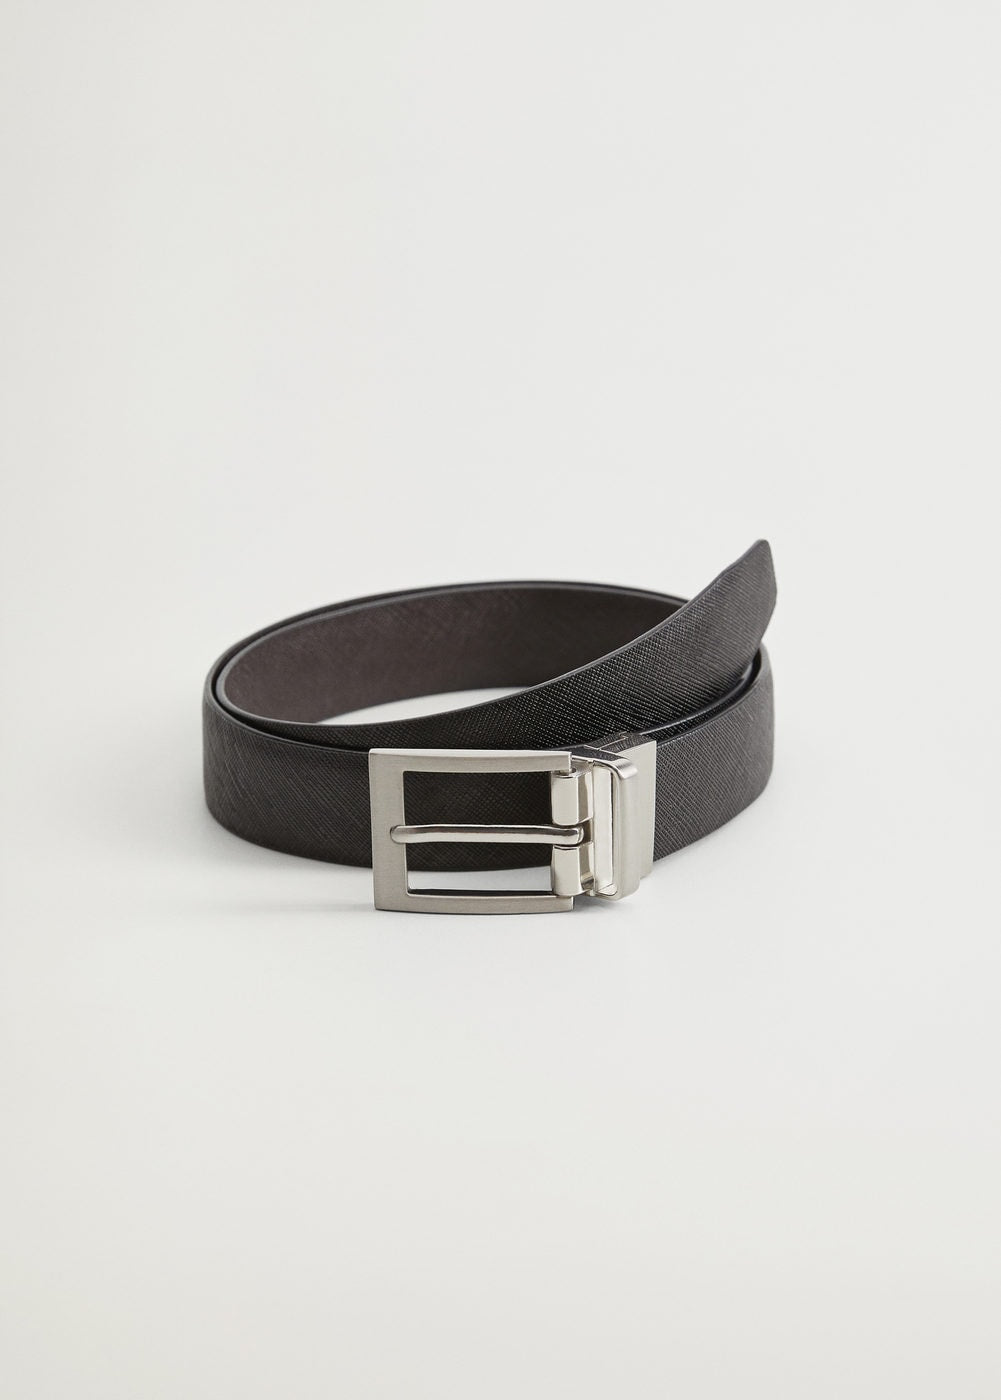 Mango Emili Black Saffiano Real Leather Tailored Mens Belt - Stockpoint Apparel Outlet